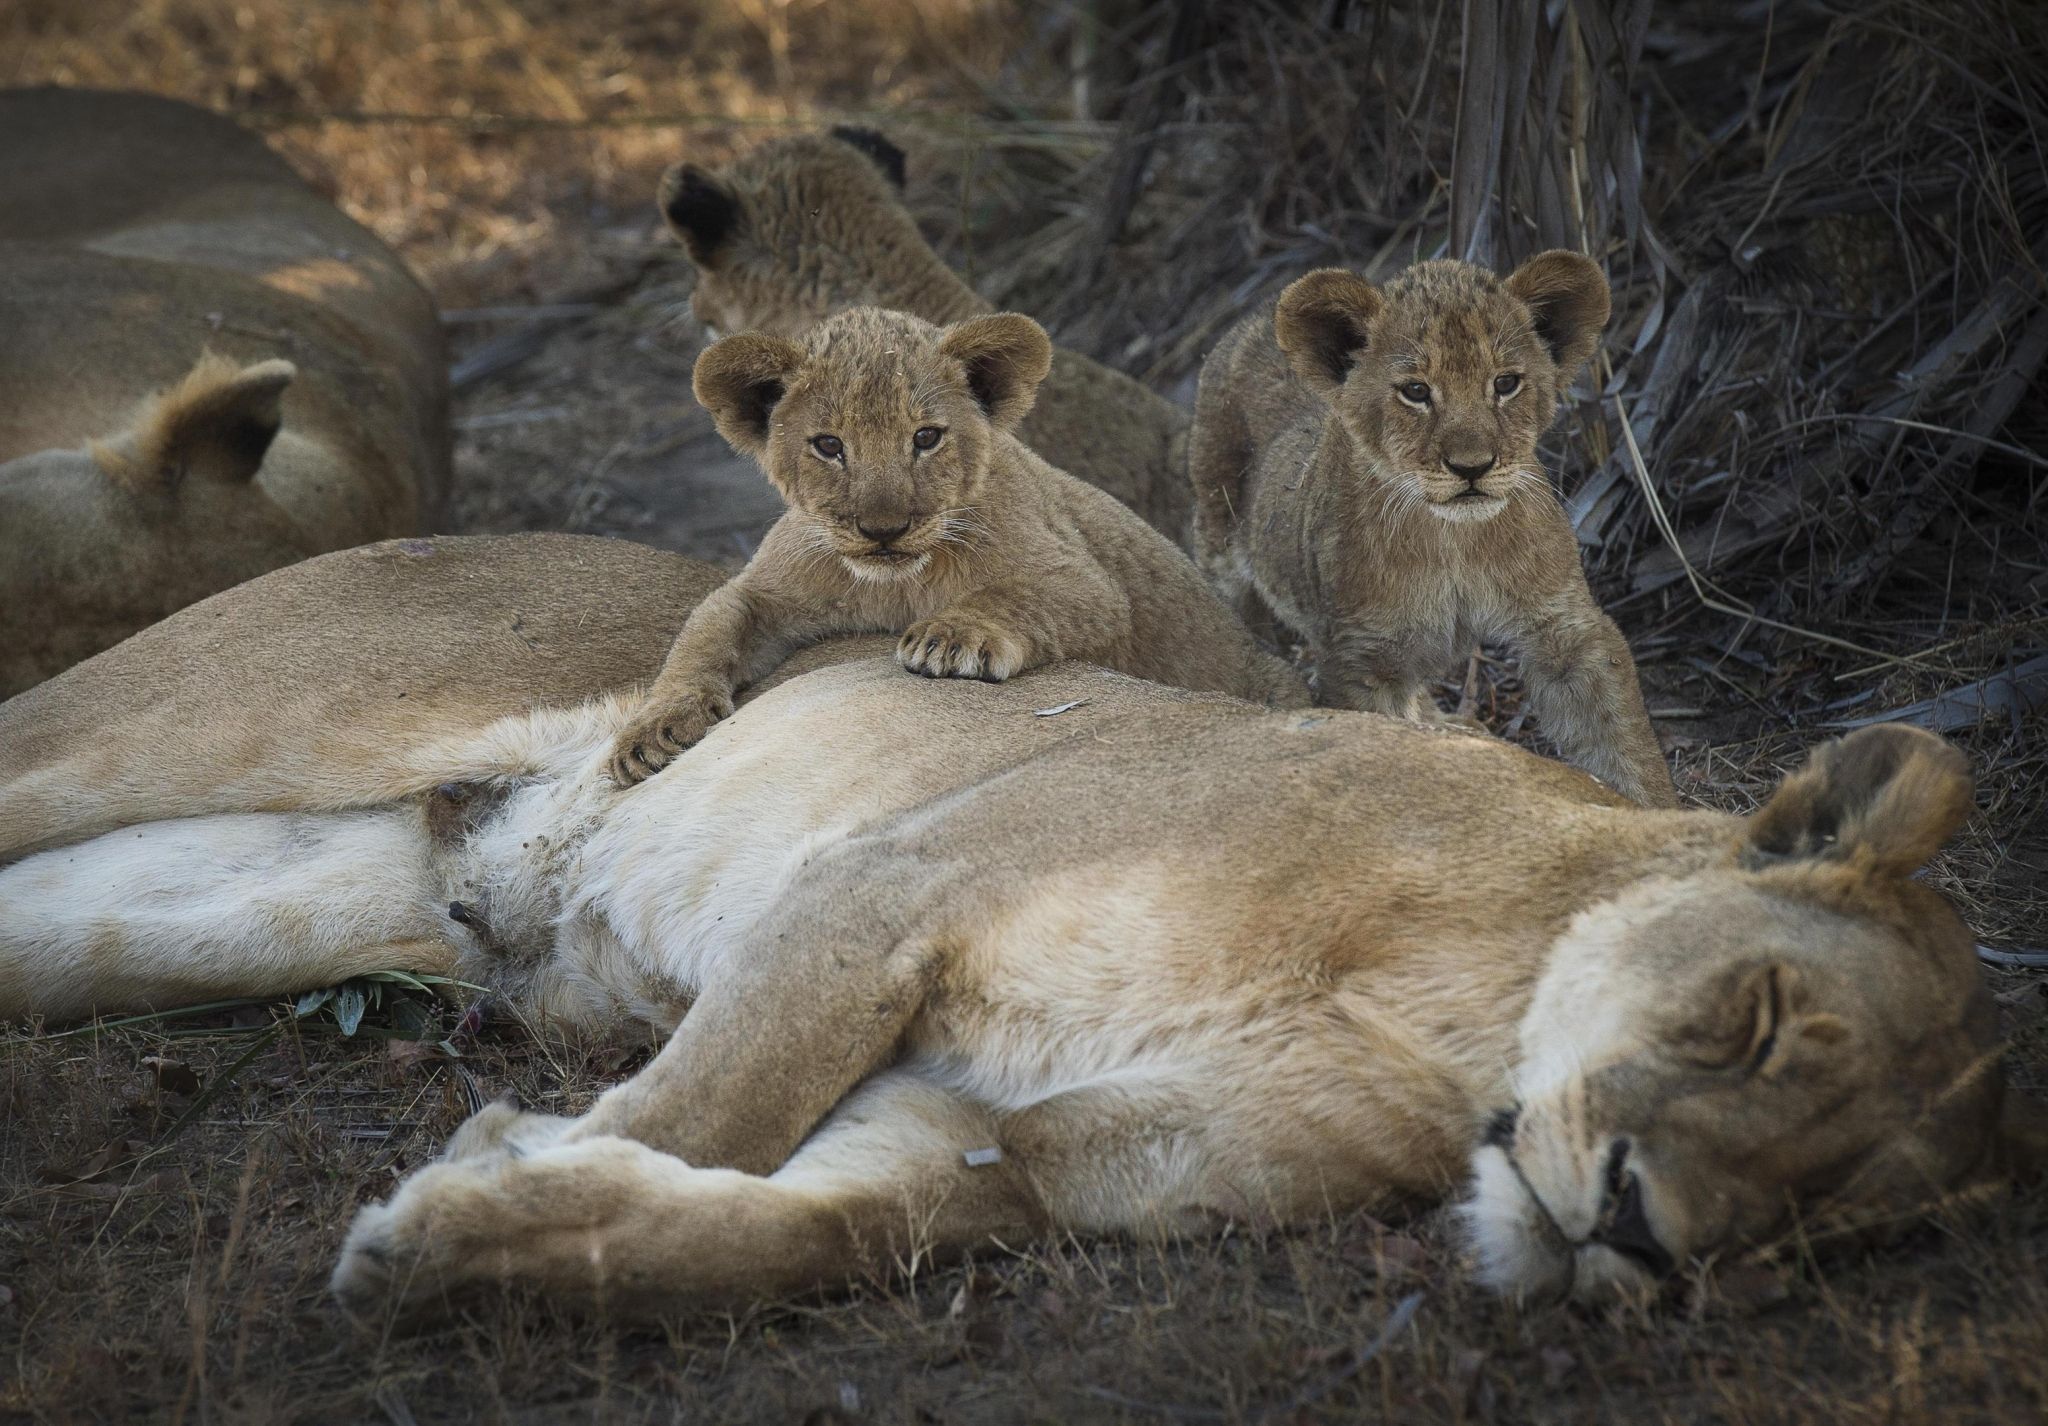 Lions lounging under shade in Katavi, a gem among national parks in Tanzania